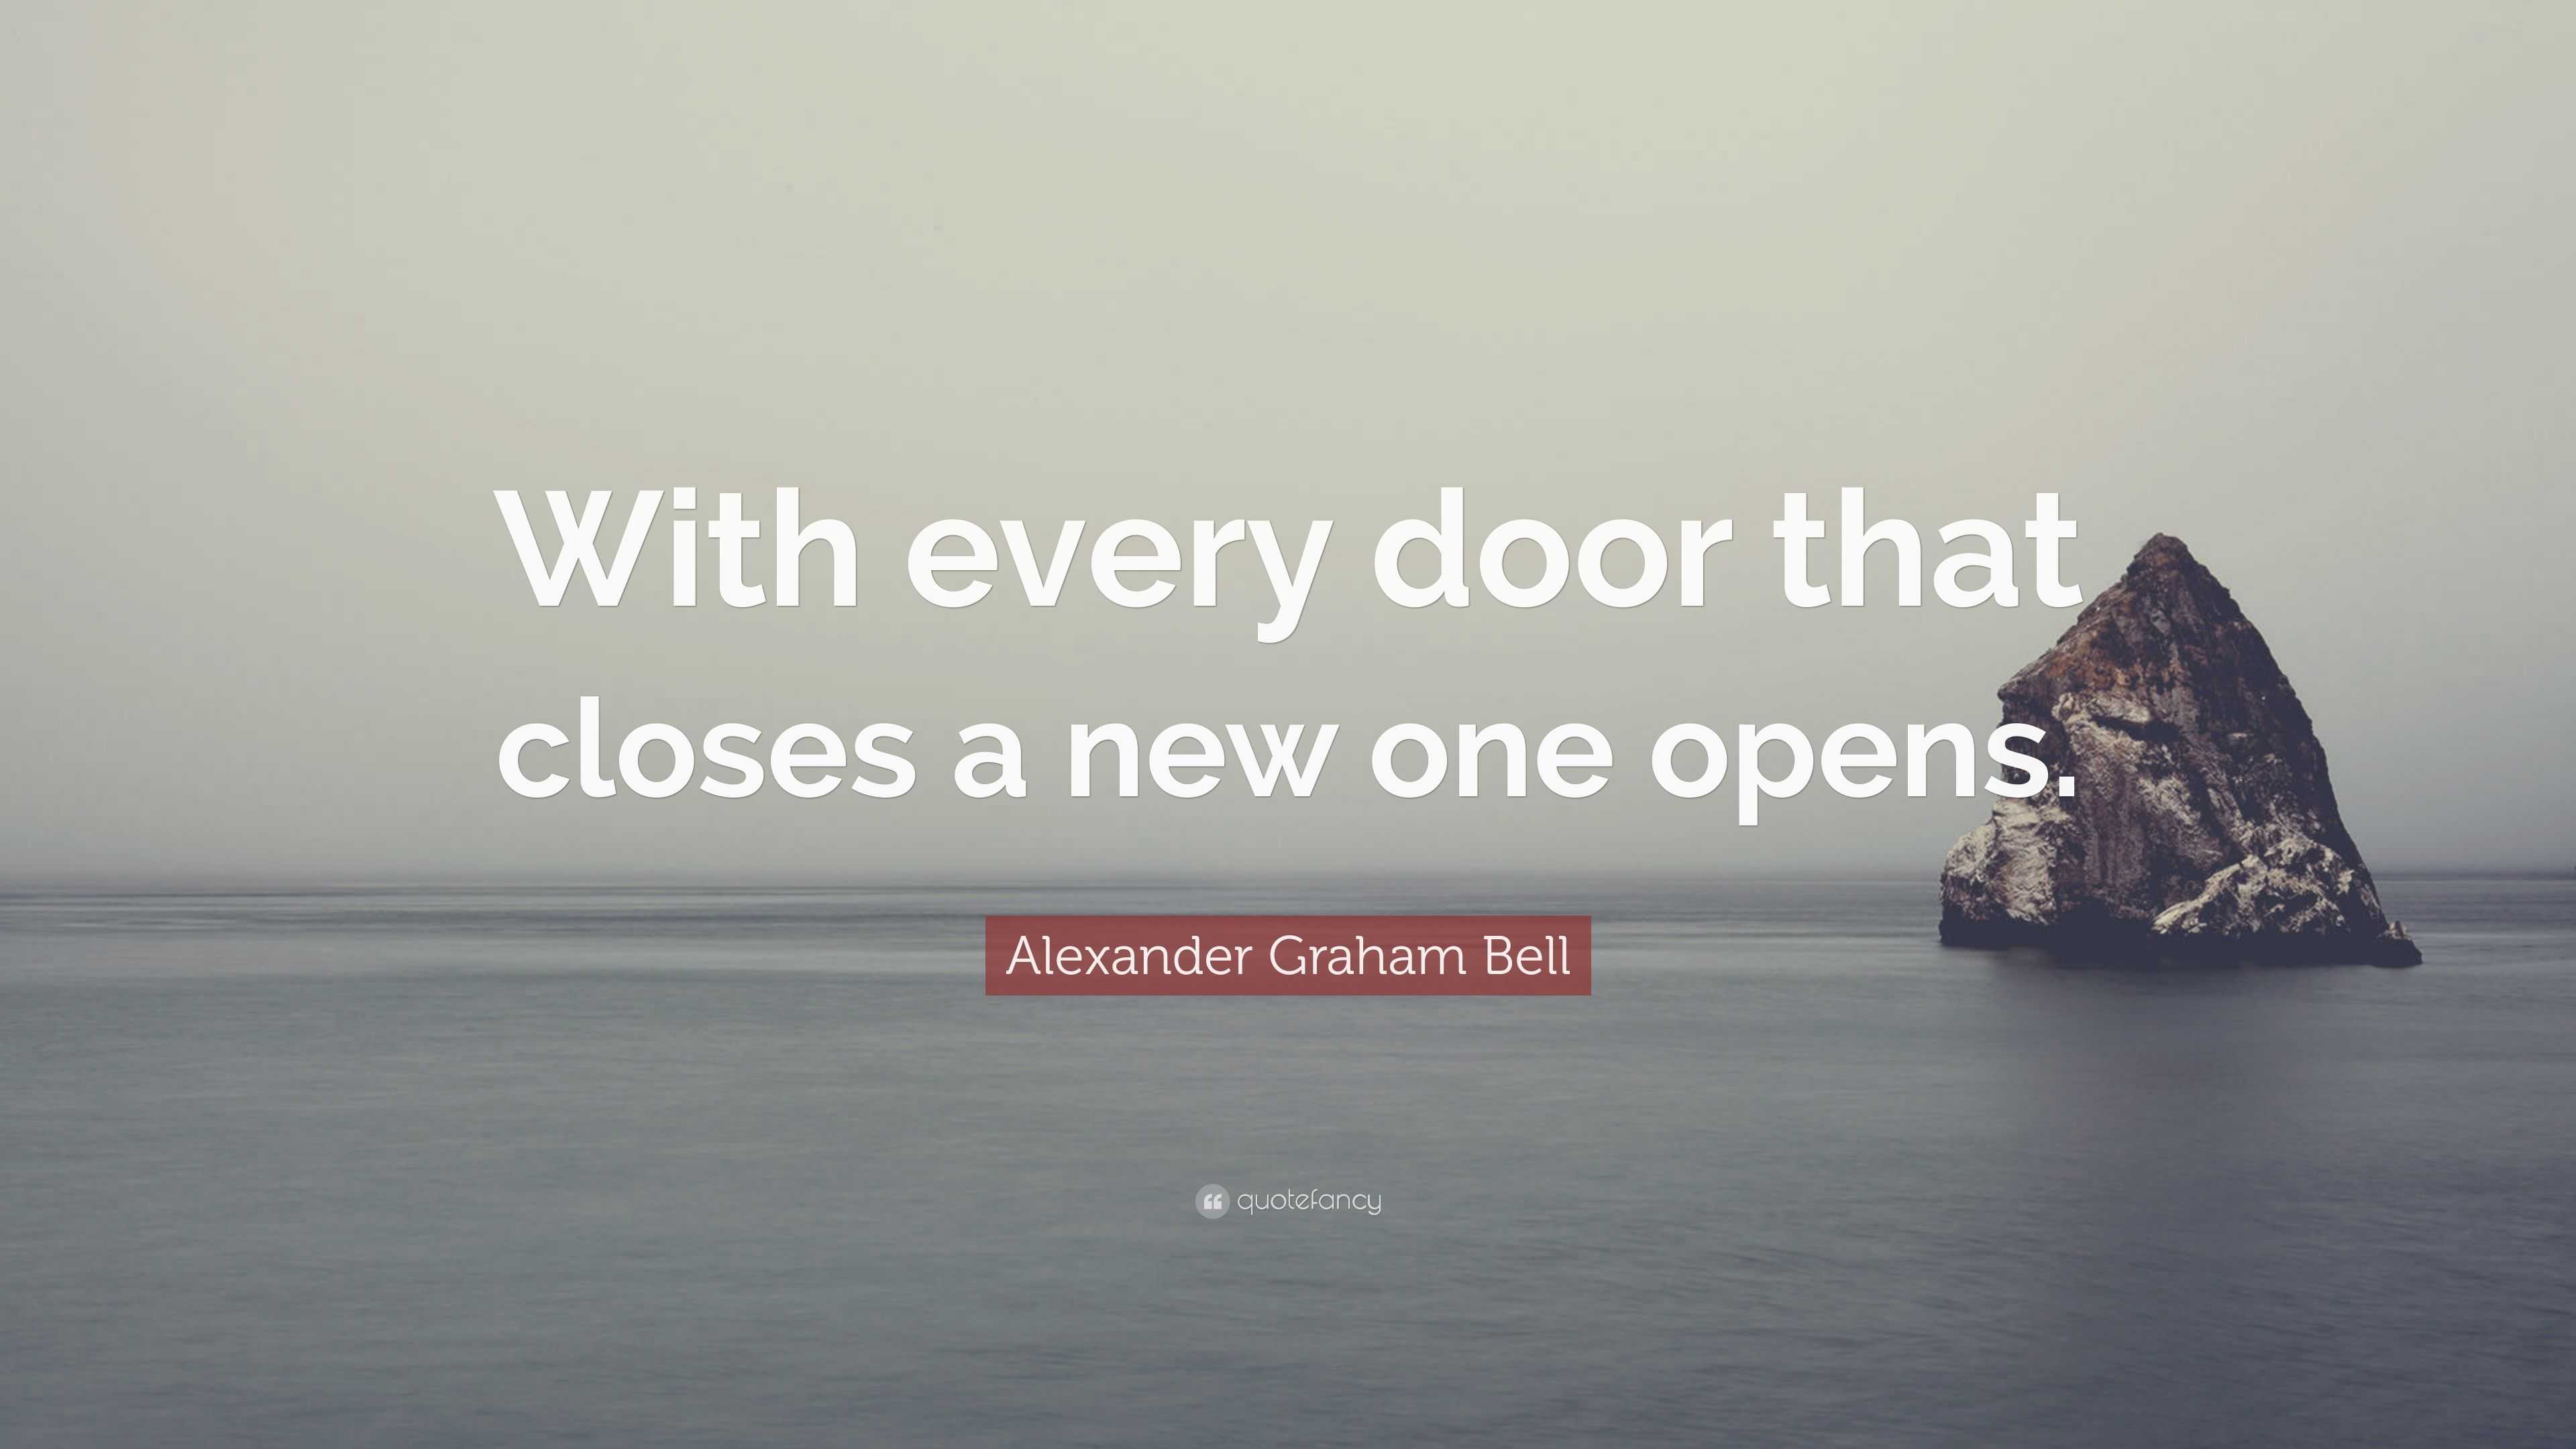 Alexander Graham Bell Quote: “With every door that closes a new one opens.”